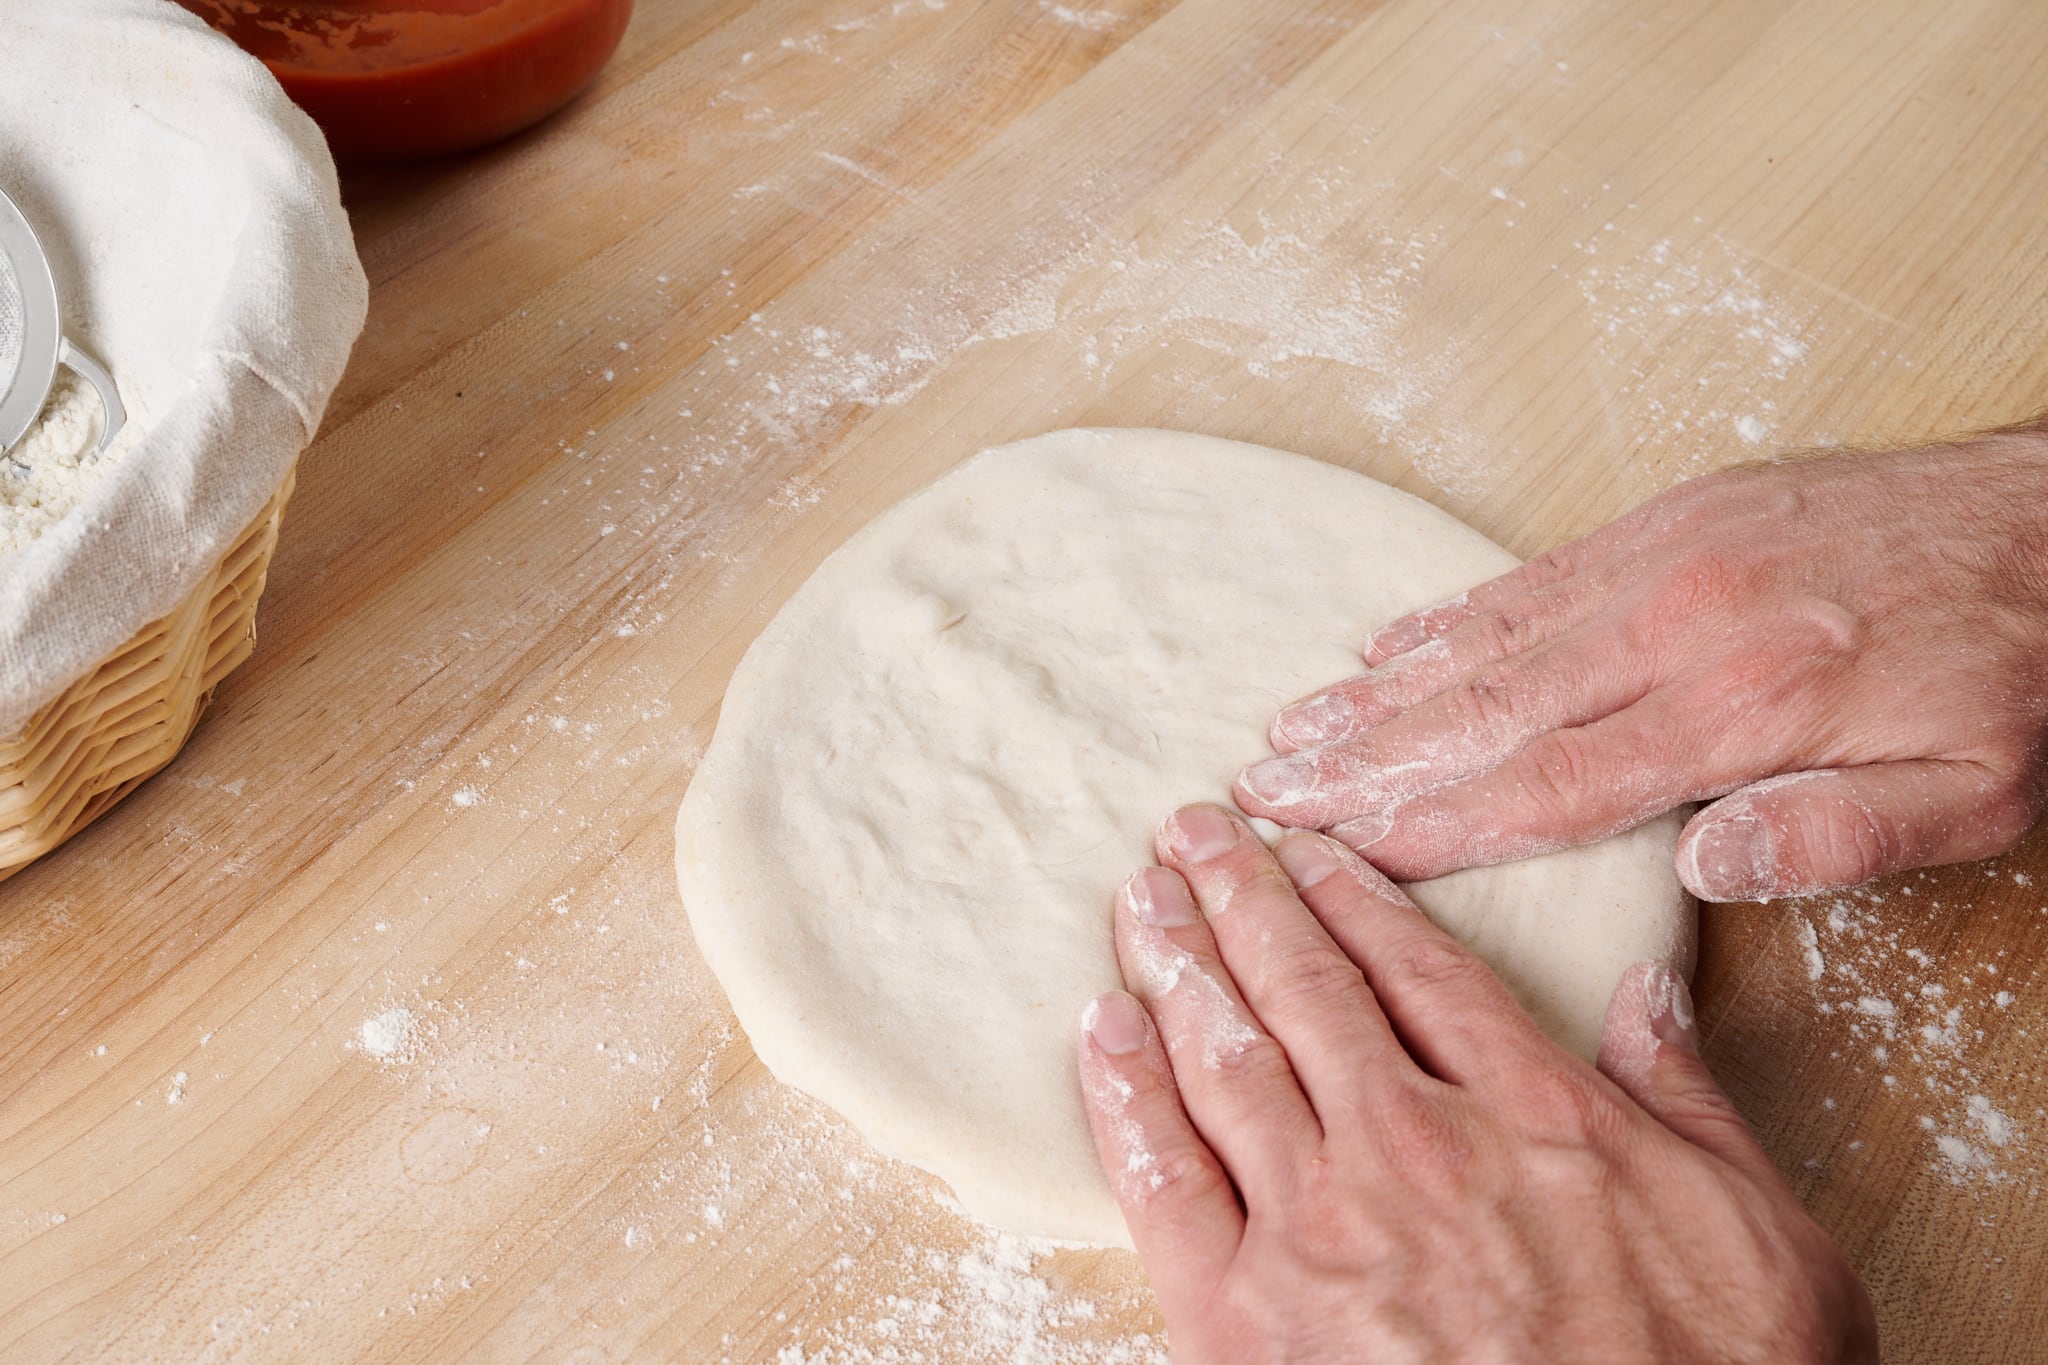 Preparing sourdough pizza dough for wood-fired oven